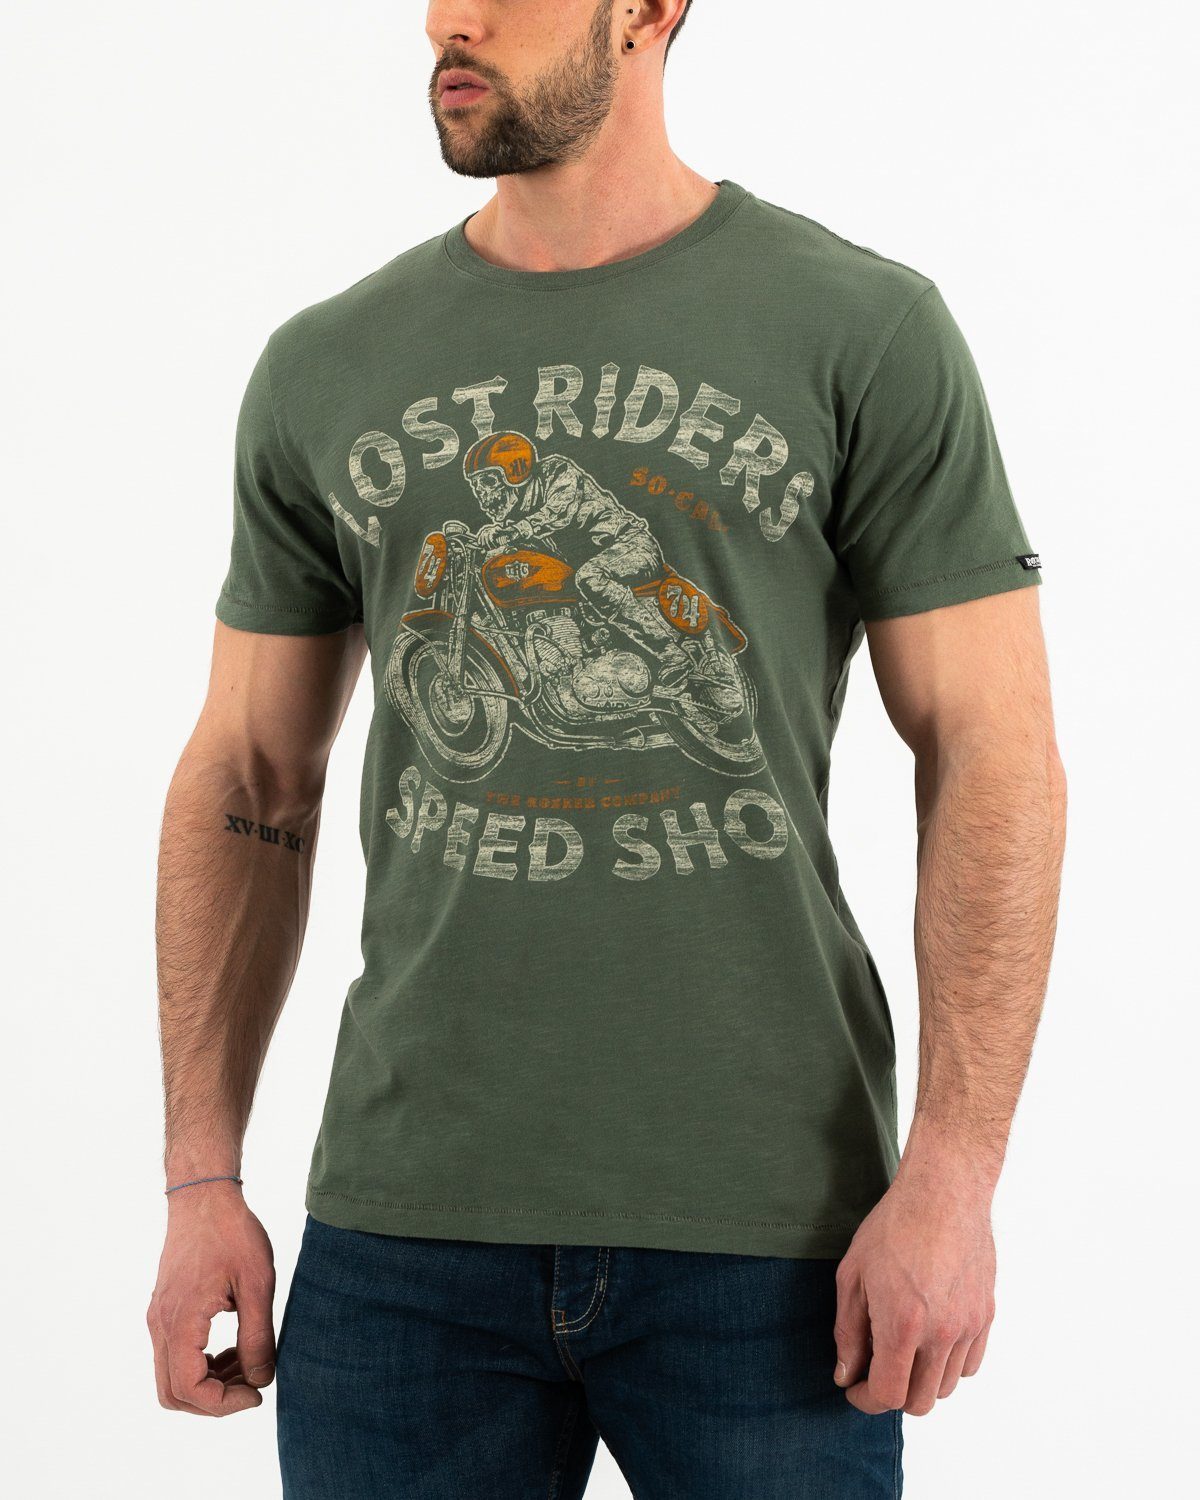 Lost Riders T-Shirt The Rokker Company Olive S 